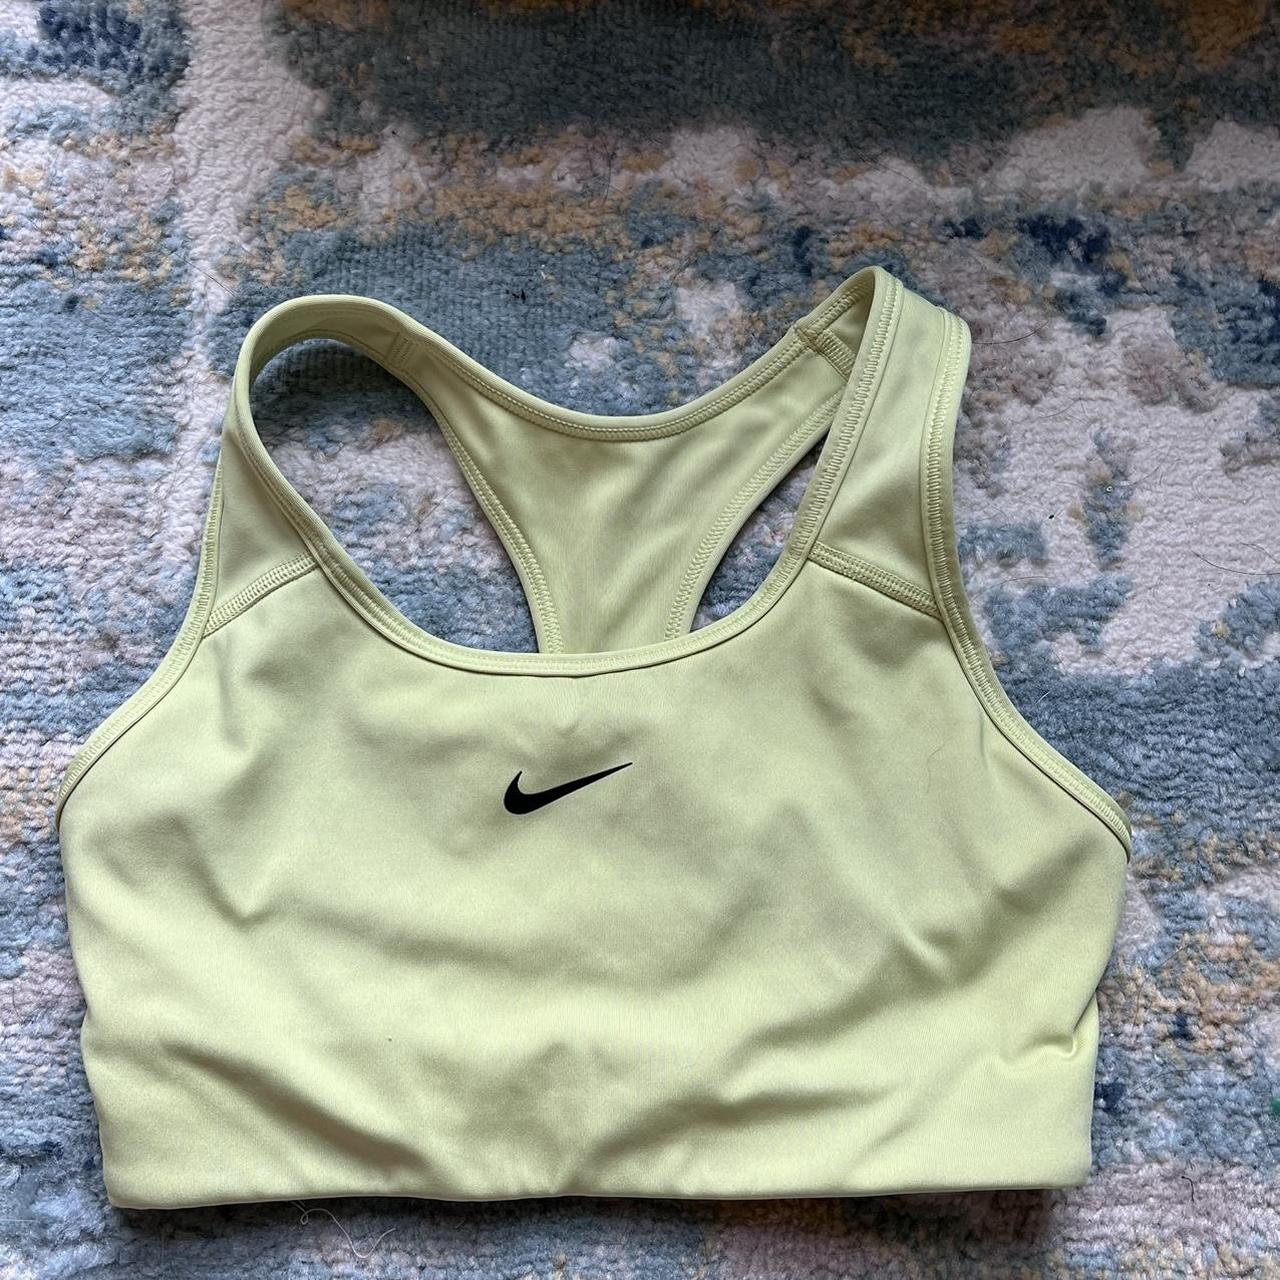 New with tag Xersion sports bra size small. Color - Depop